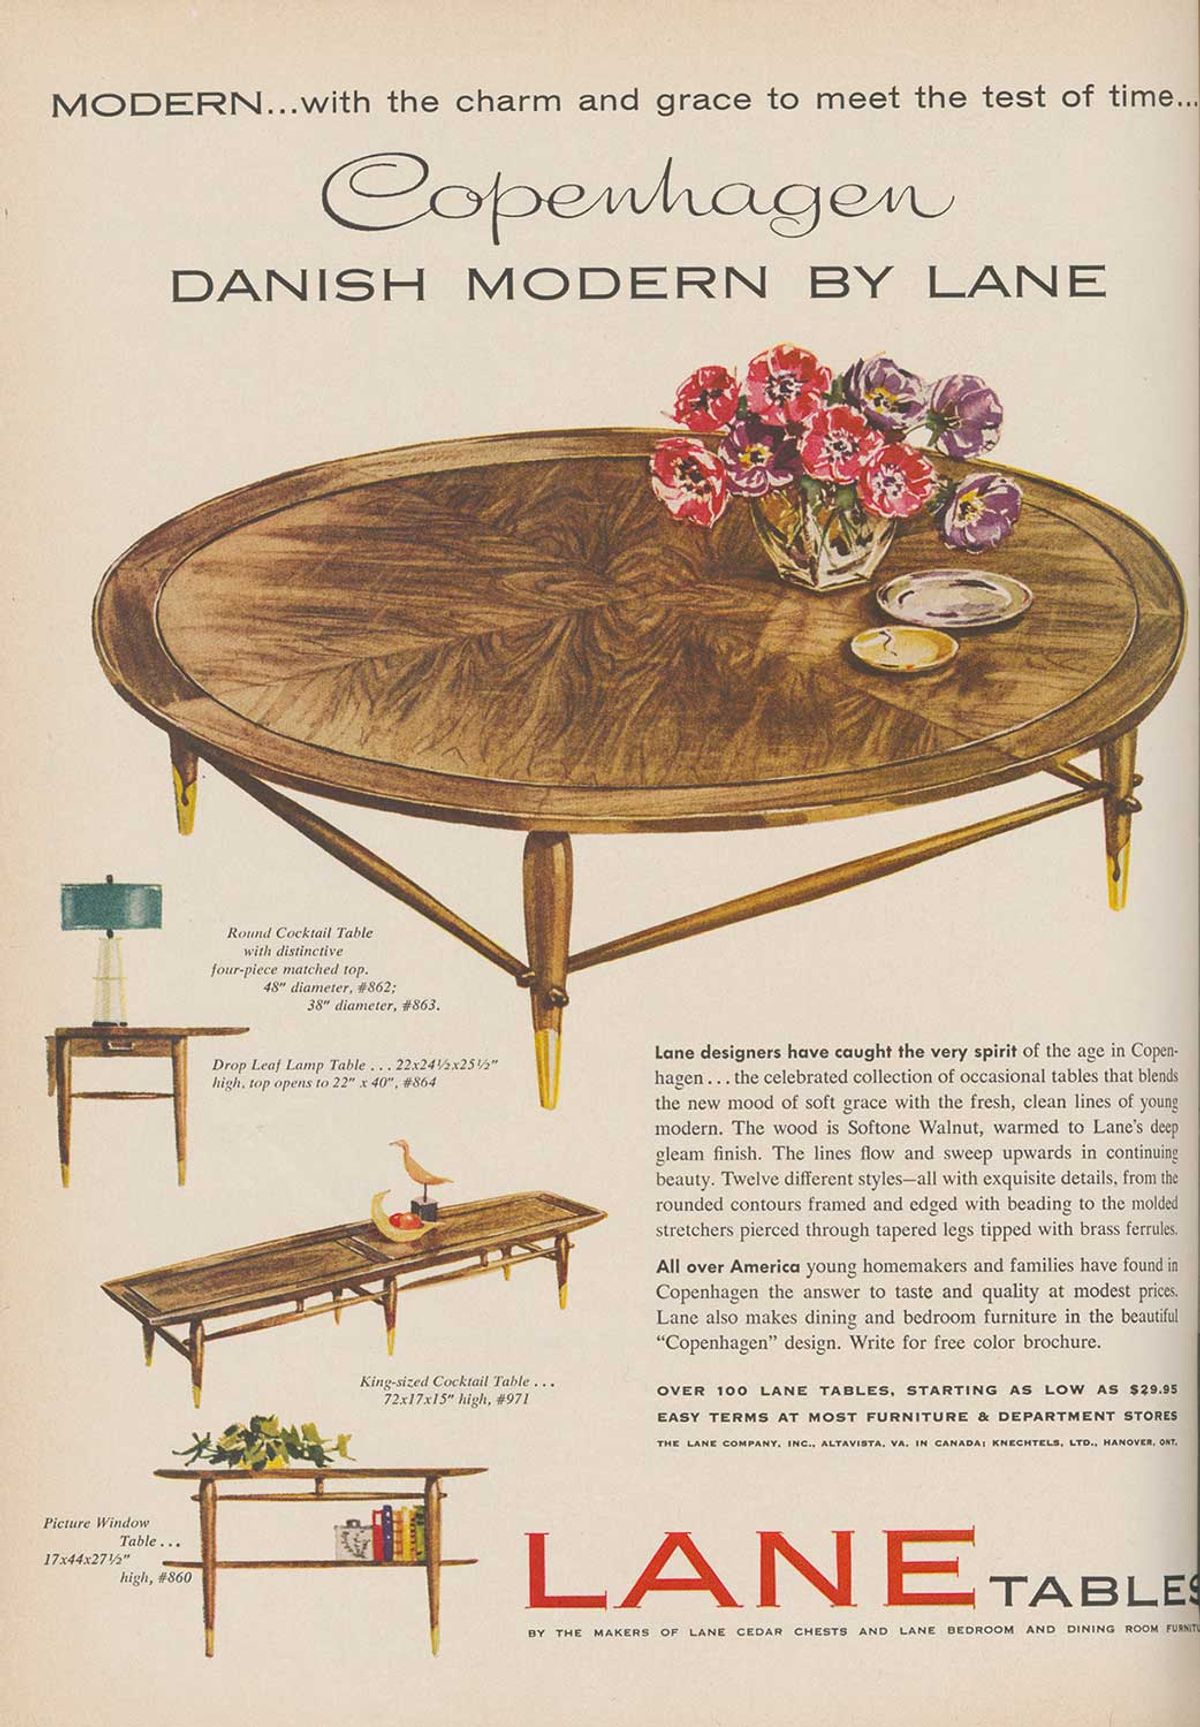 “The concept of Danish design was consciously invented with a clear marketing narrative”: an advert for American company Lane’s Copenhagen series of furniture in Life magazine, 1958

Courtesy University of Chicago Press
